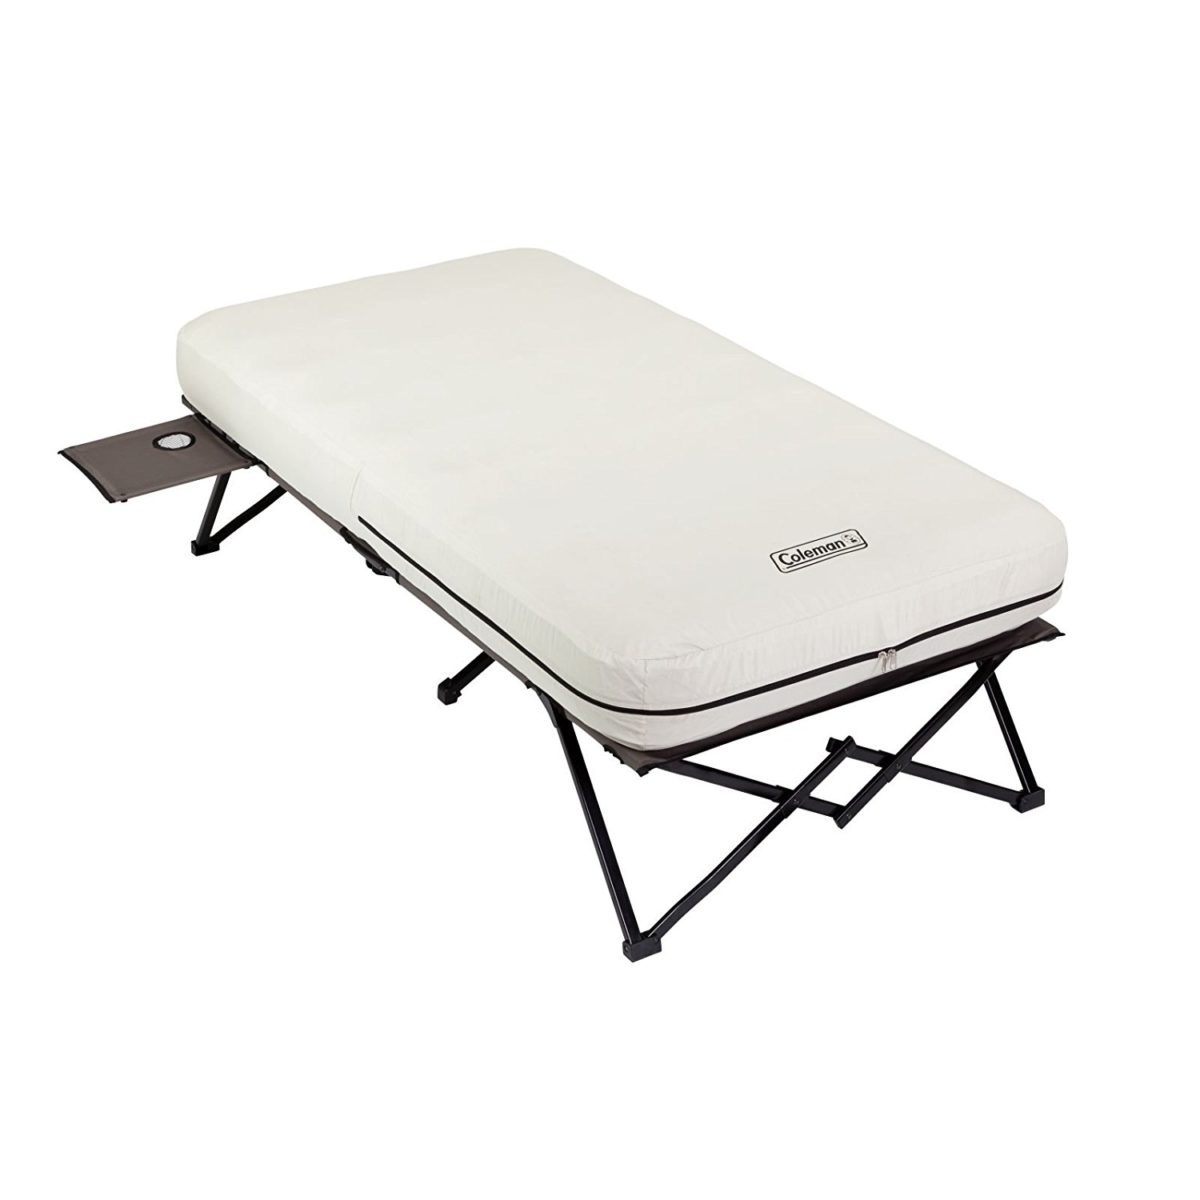 How to choose the best sleeping cots for Adults Guide to select the best